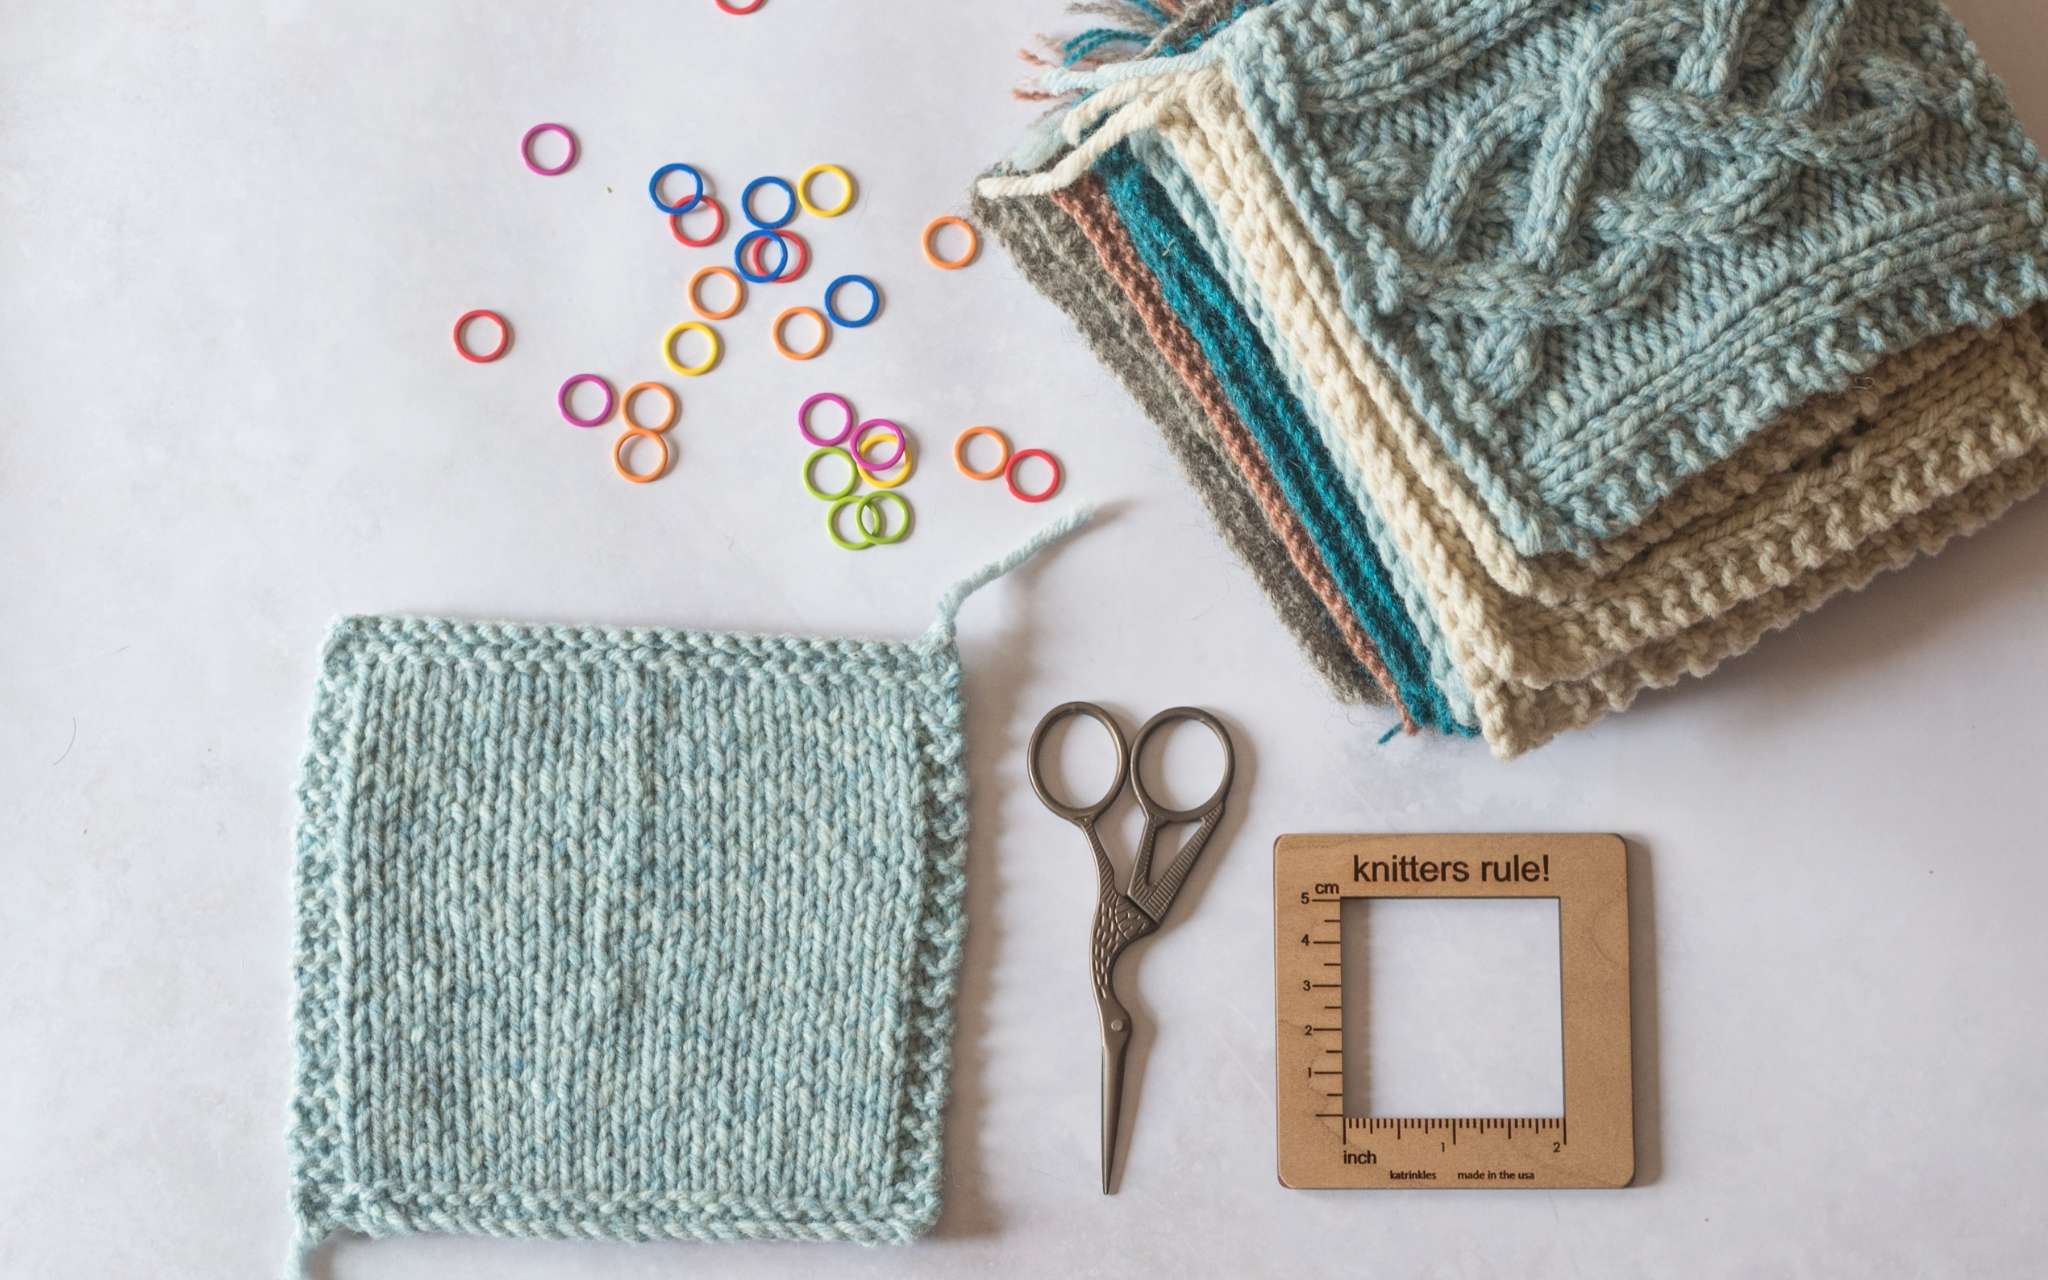 A blue stocking stitch swatch lies on a pale flat surface. Next to it is a small pair of scissors, a wooden gauge tool, coloured stitch markers and a pile of swatches.